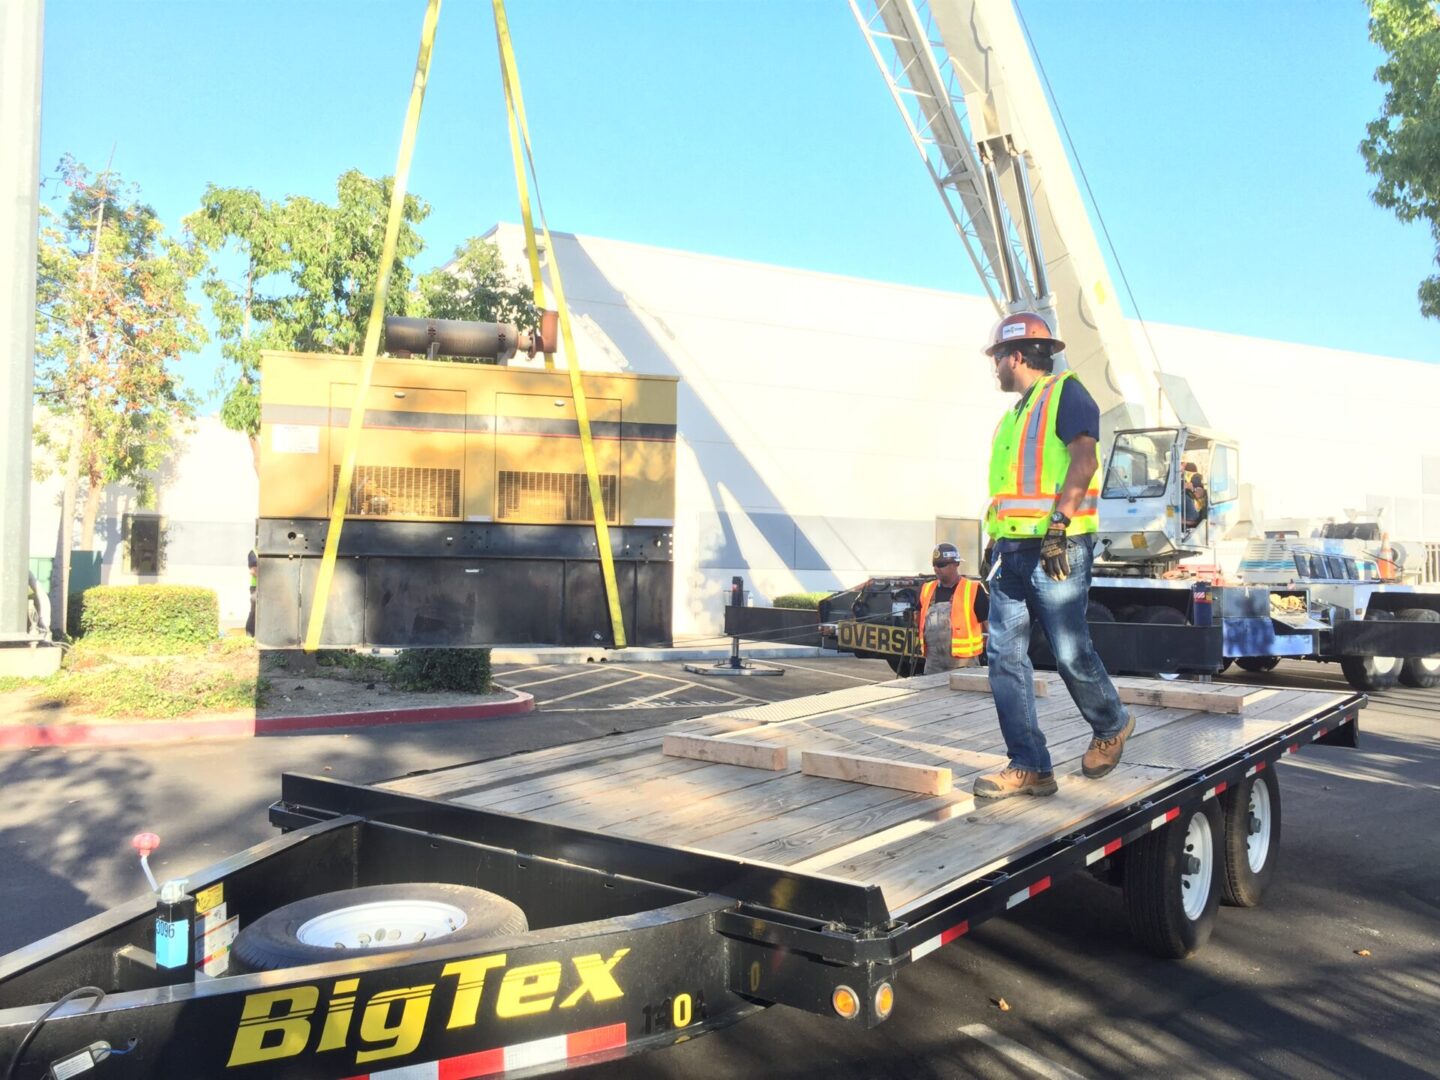 Big yellow generator being loaded unto a wooden platform using a pulley lift truck